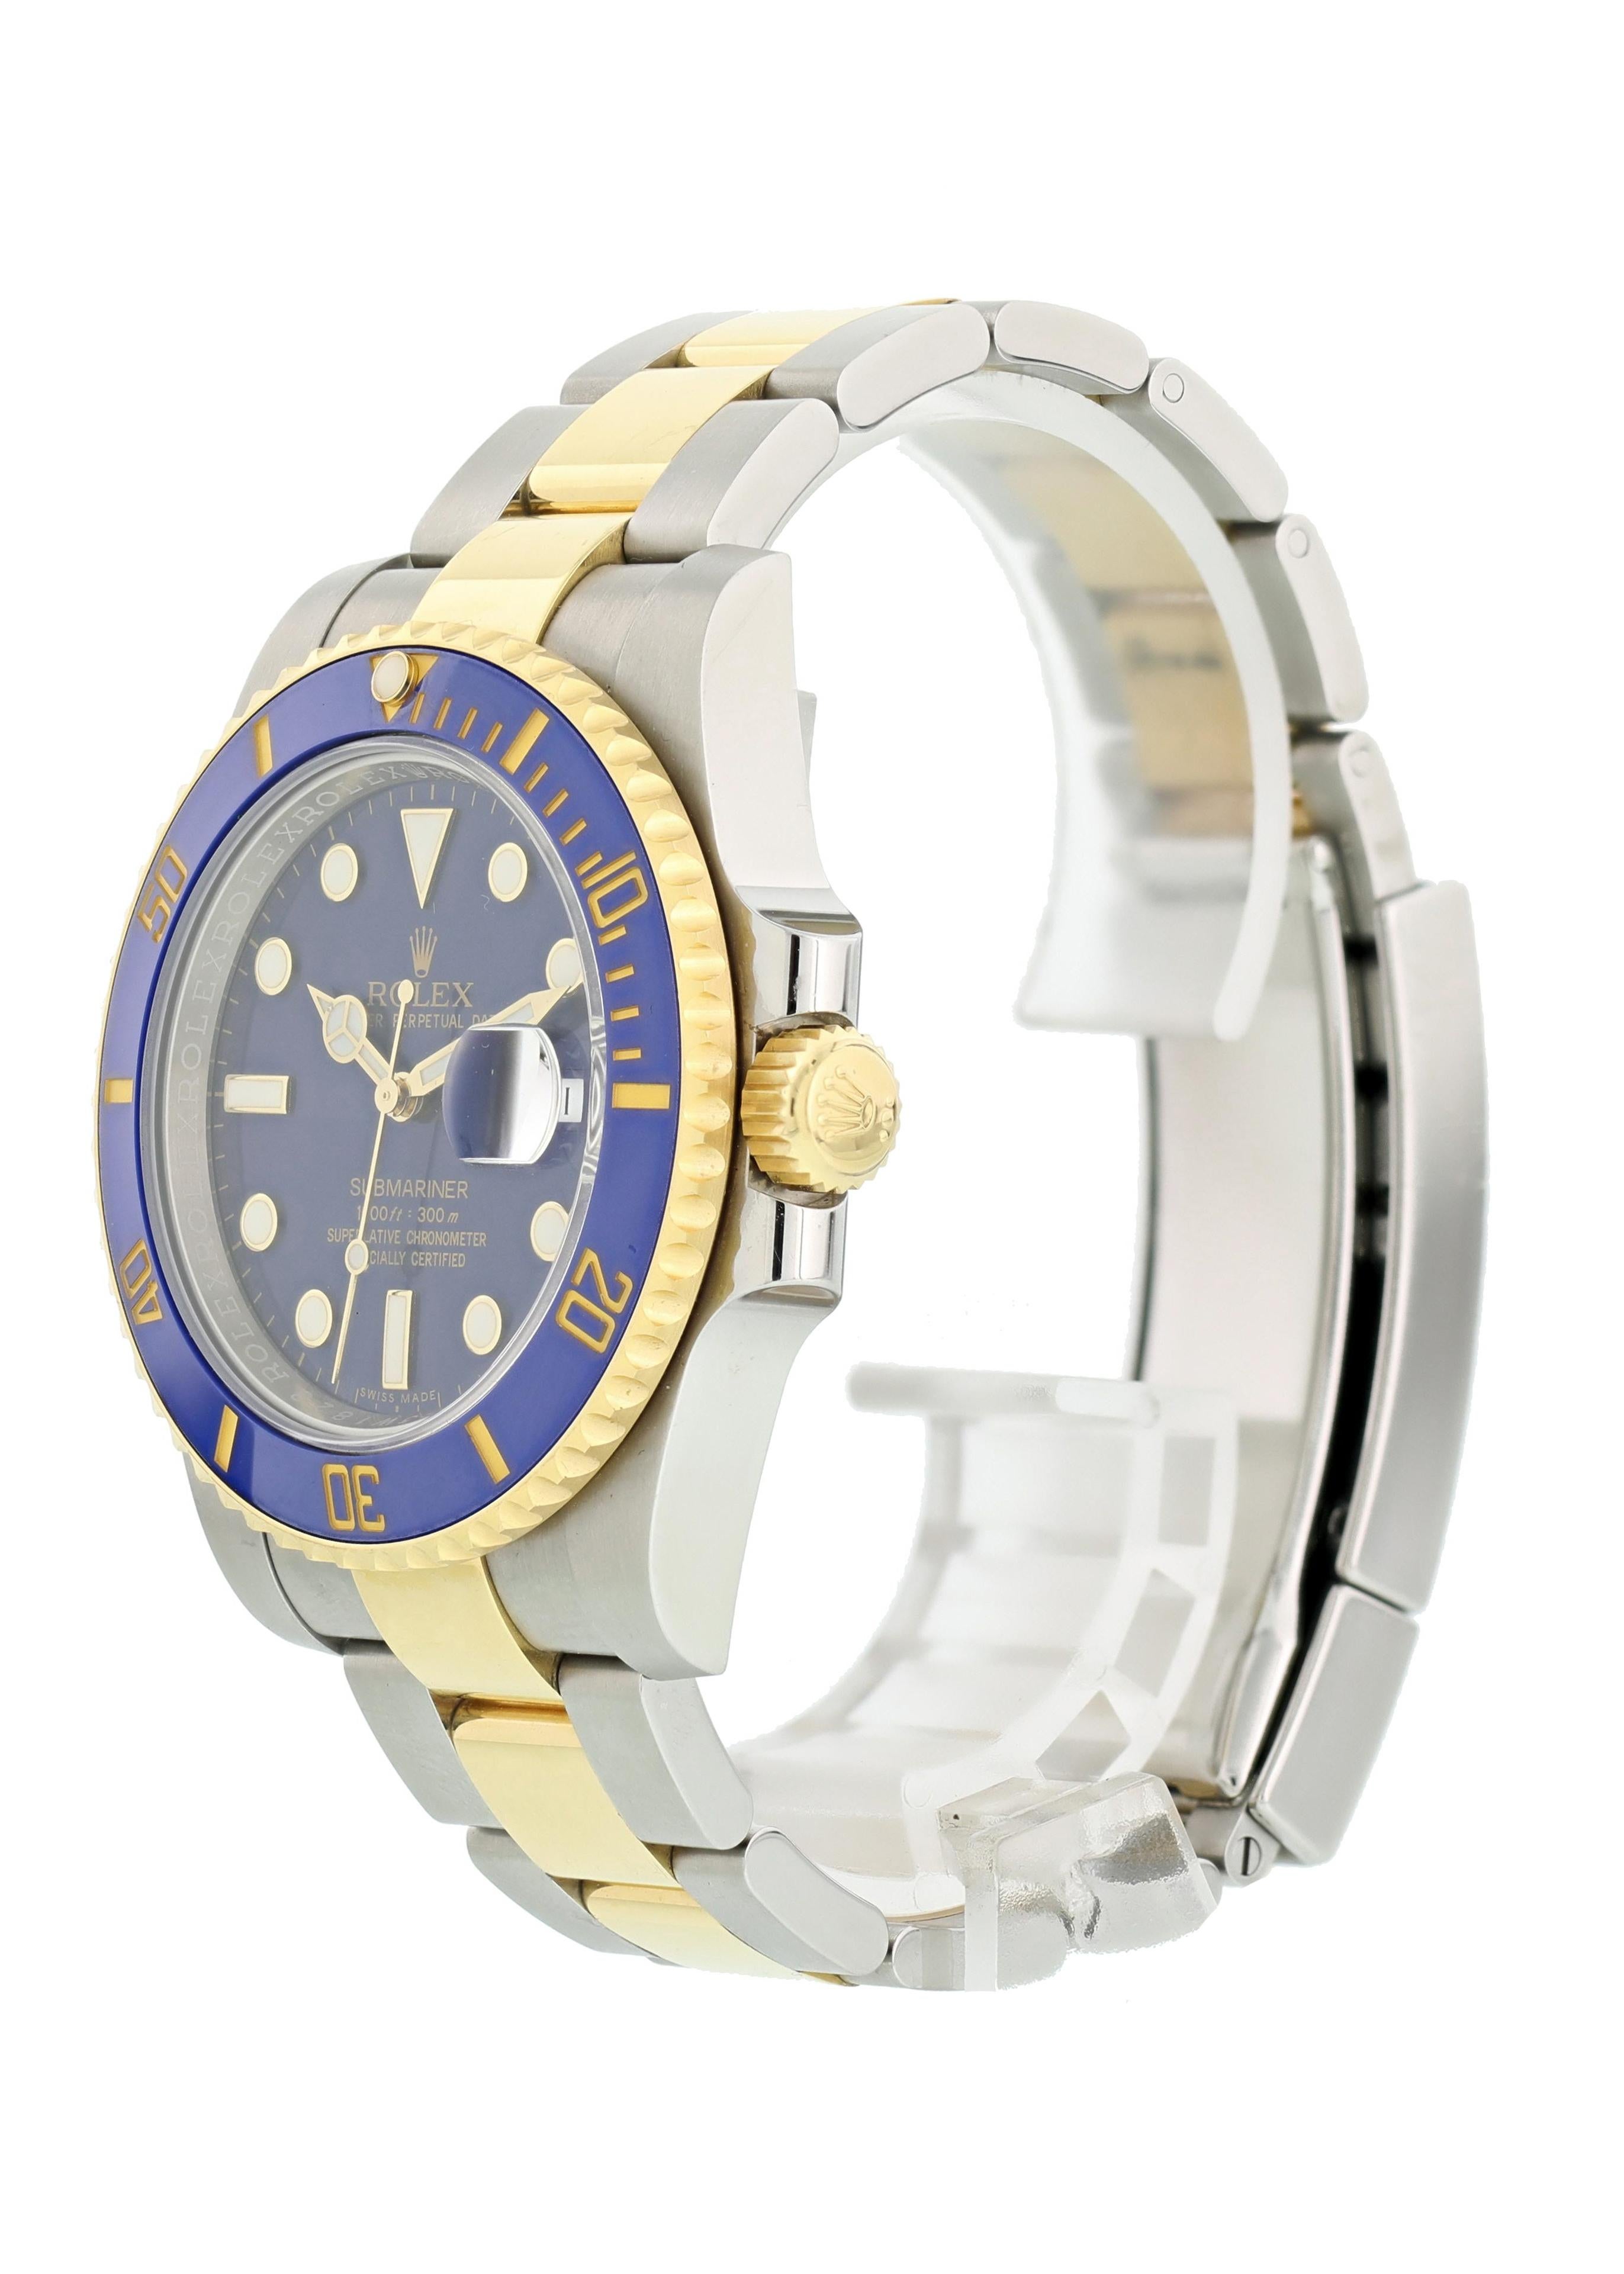 Rolex Oyster Perpetual Date Submariner 116613 Mens Watch. 40mm Stainless steel case. Unidirectional rotating 18K yellow gold bezel with a blue ceramic top ring. Blue dial with yellow gold-tone hands and luminous dot hour markers. Minute markers